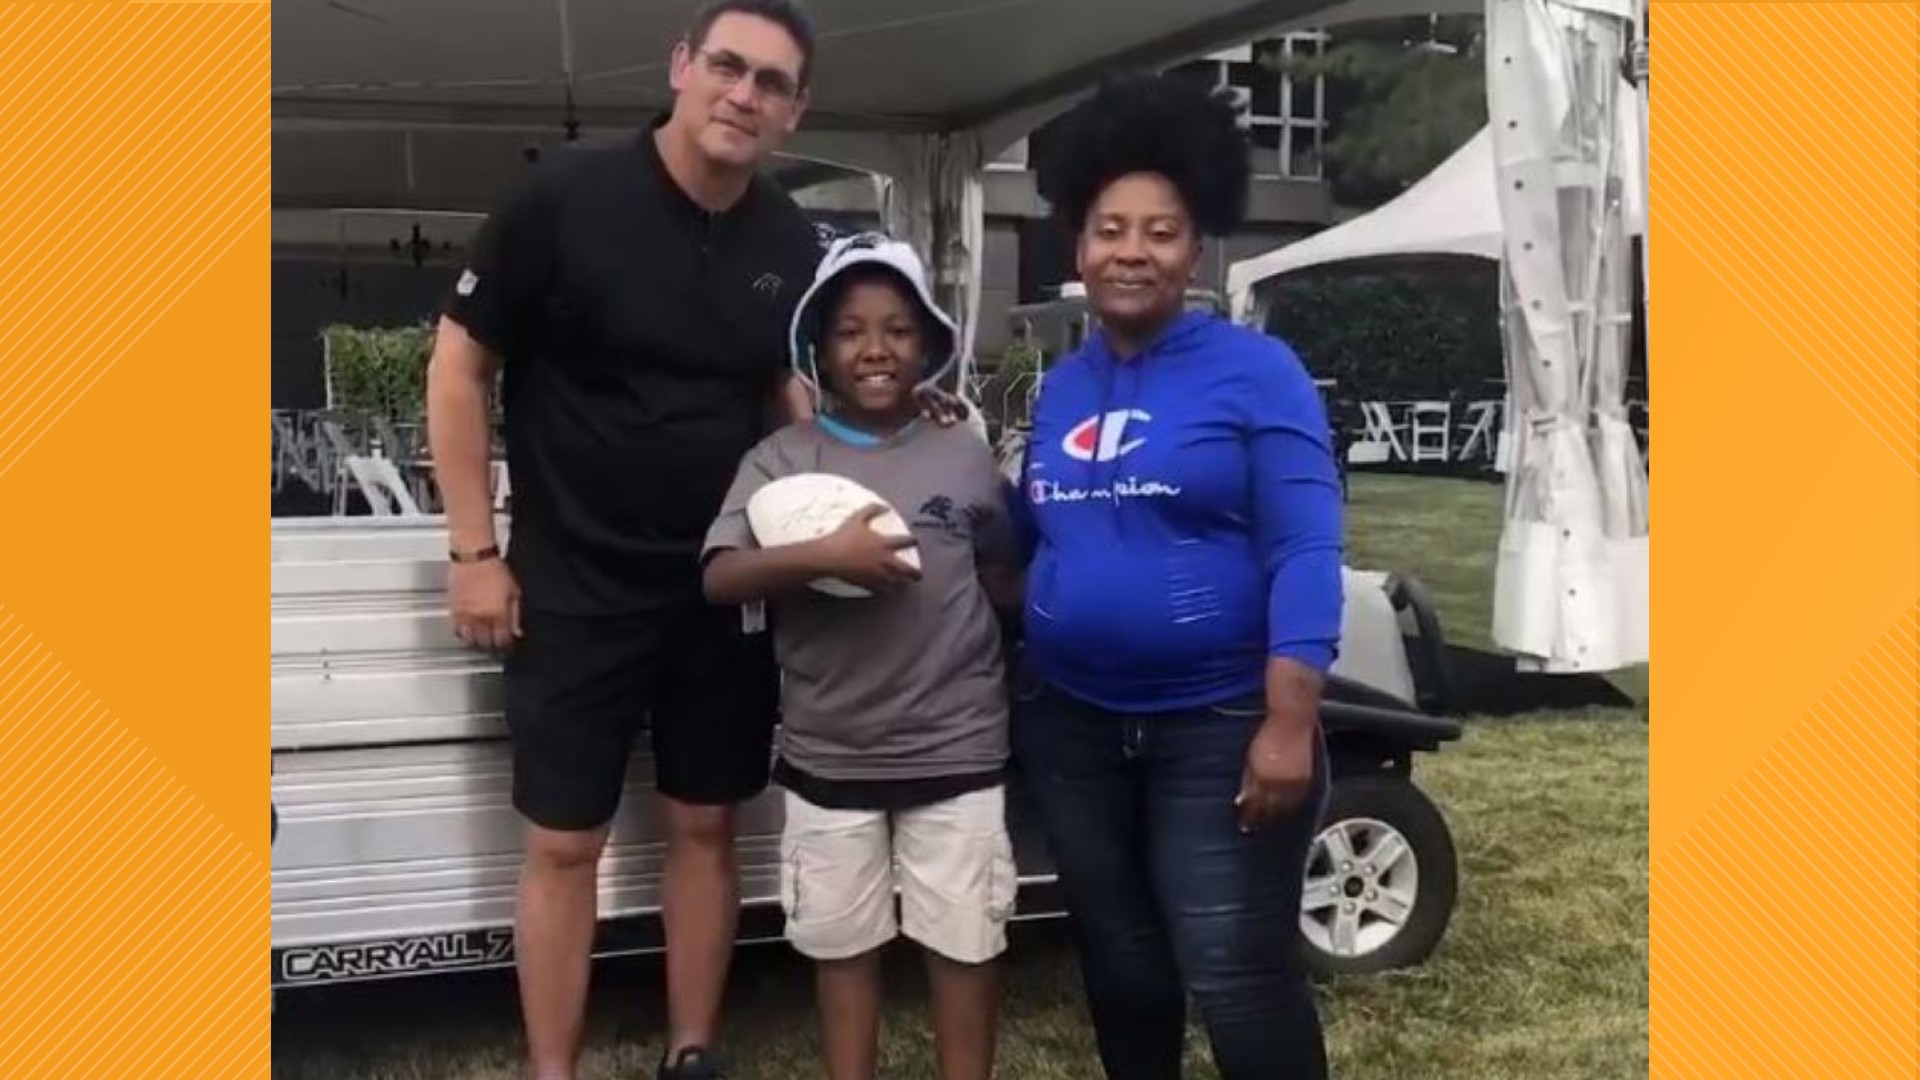 Jaylin got a brand new Panther blue colored lawnmower, an official Panther grounds crew t-shirt and to top it off and autograph football by Cam Newton.